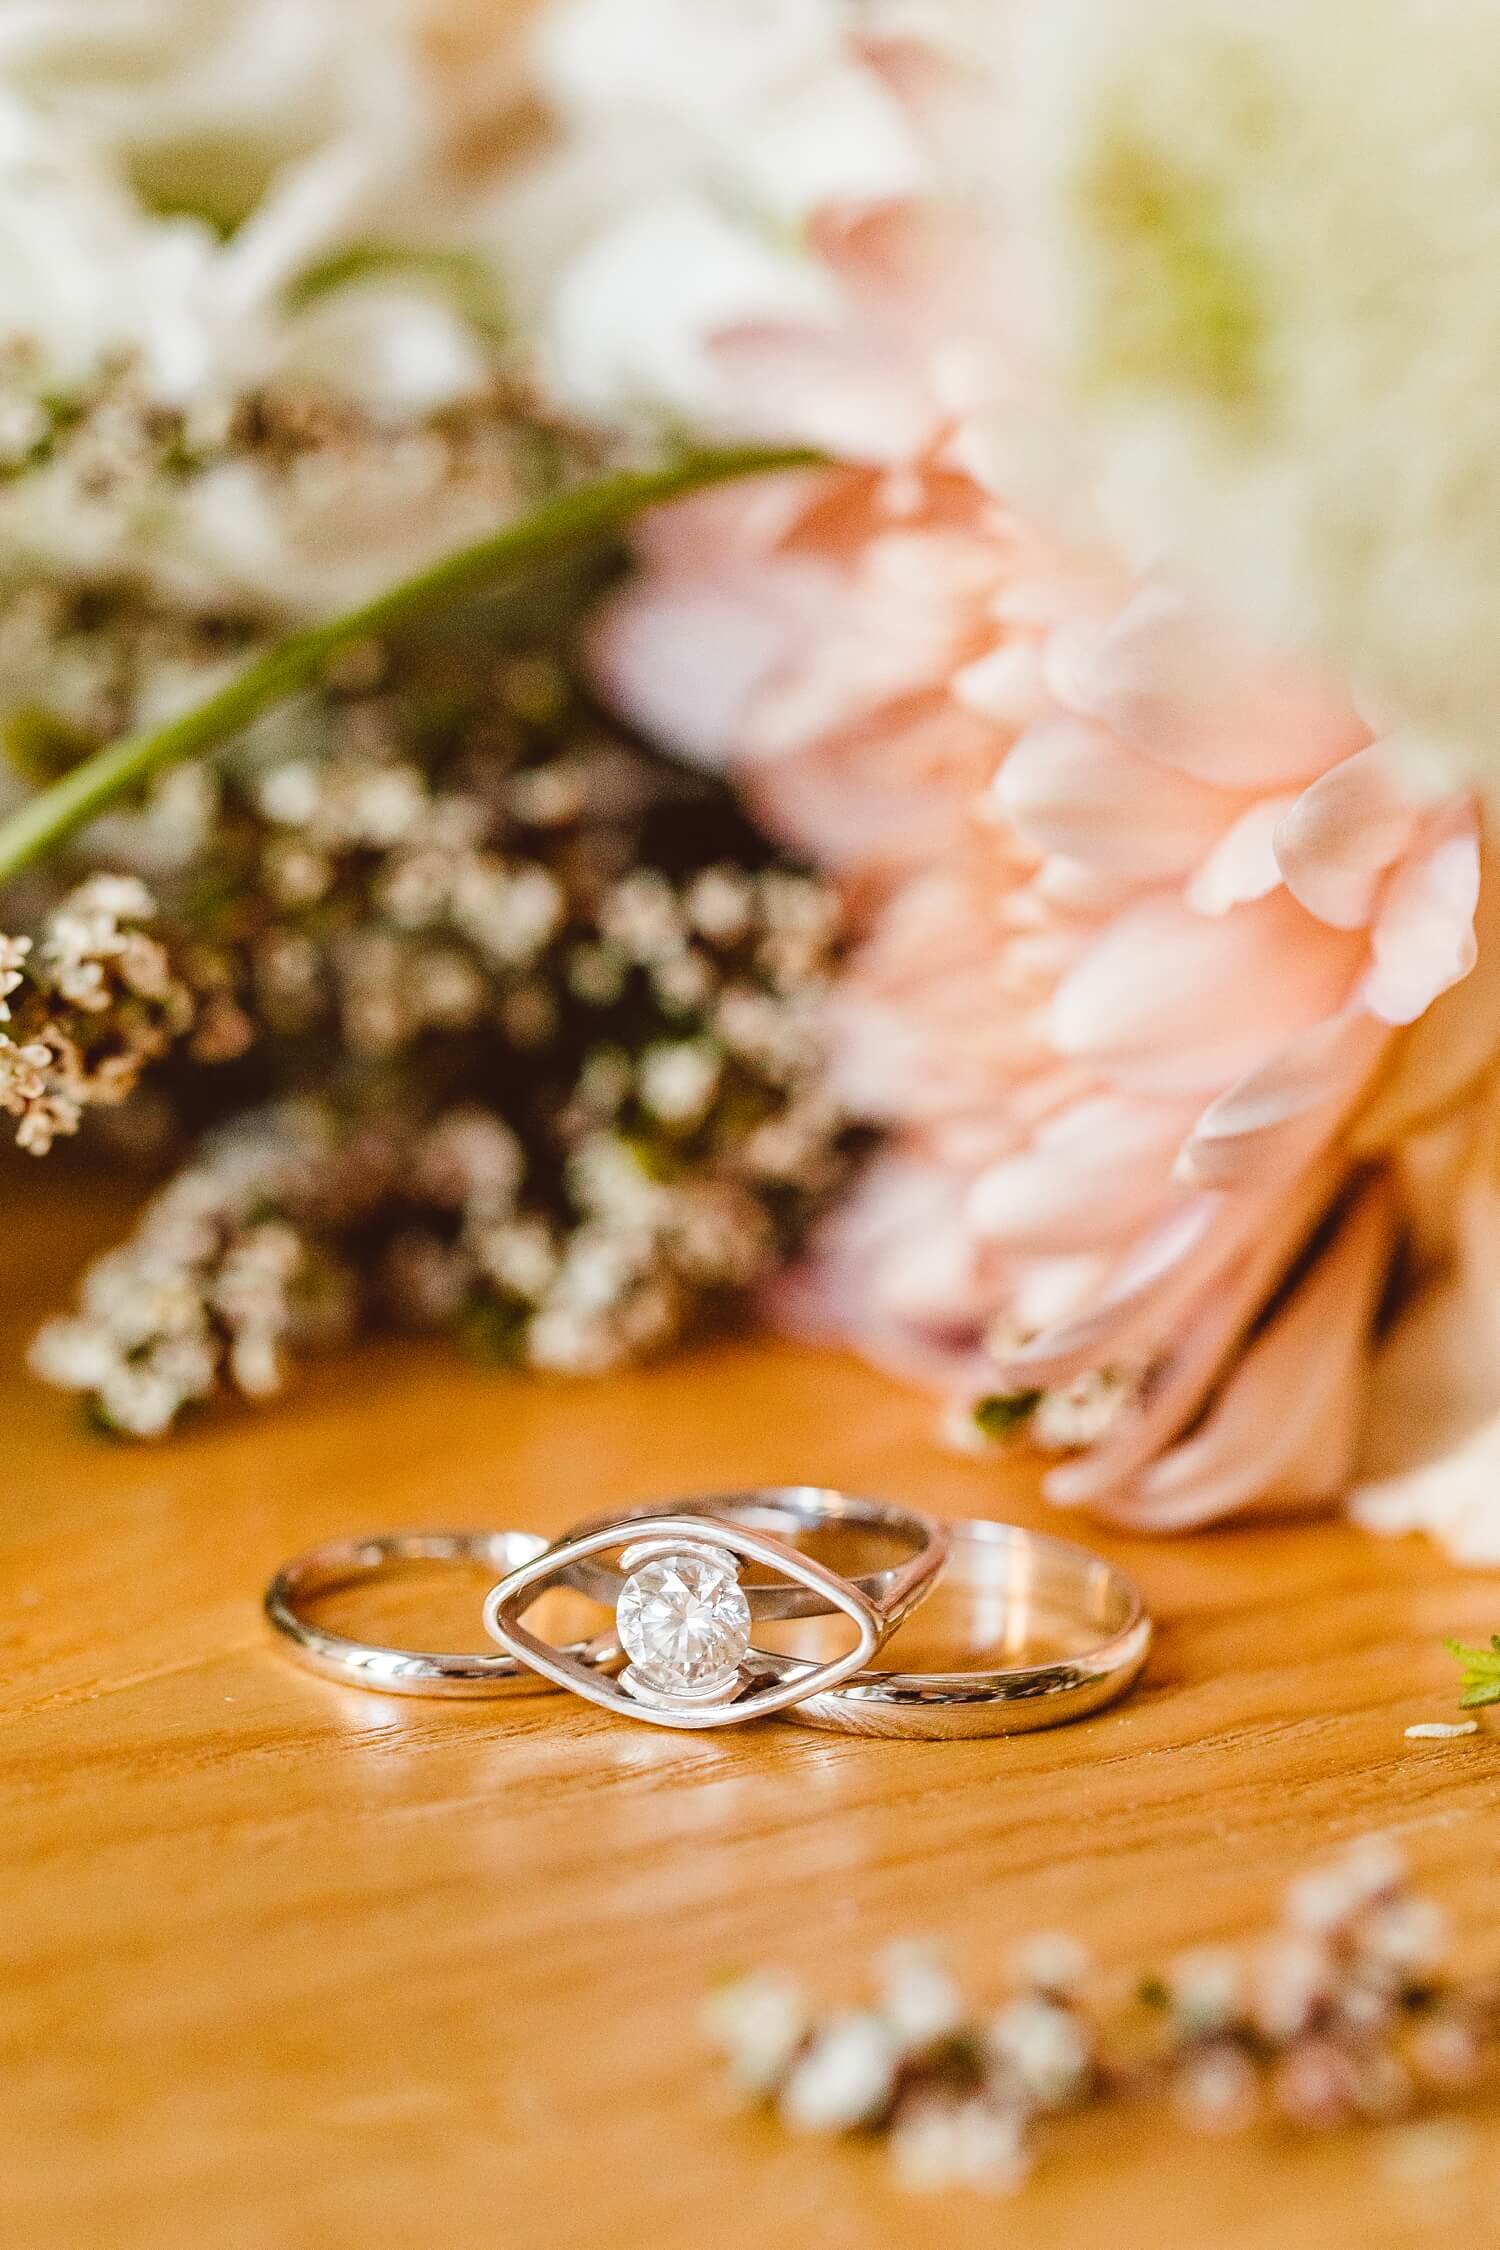 Unique engagement ring with flowers in the background | Brooke Michelle Photography